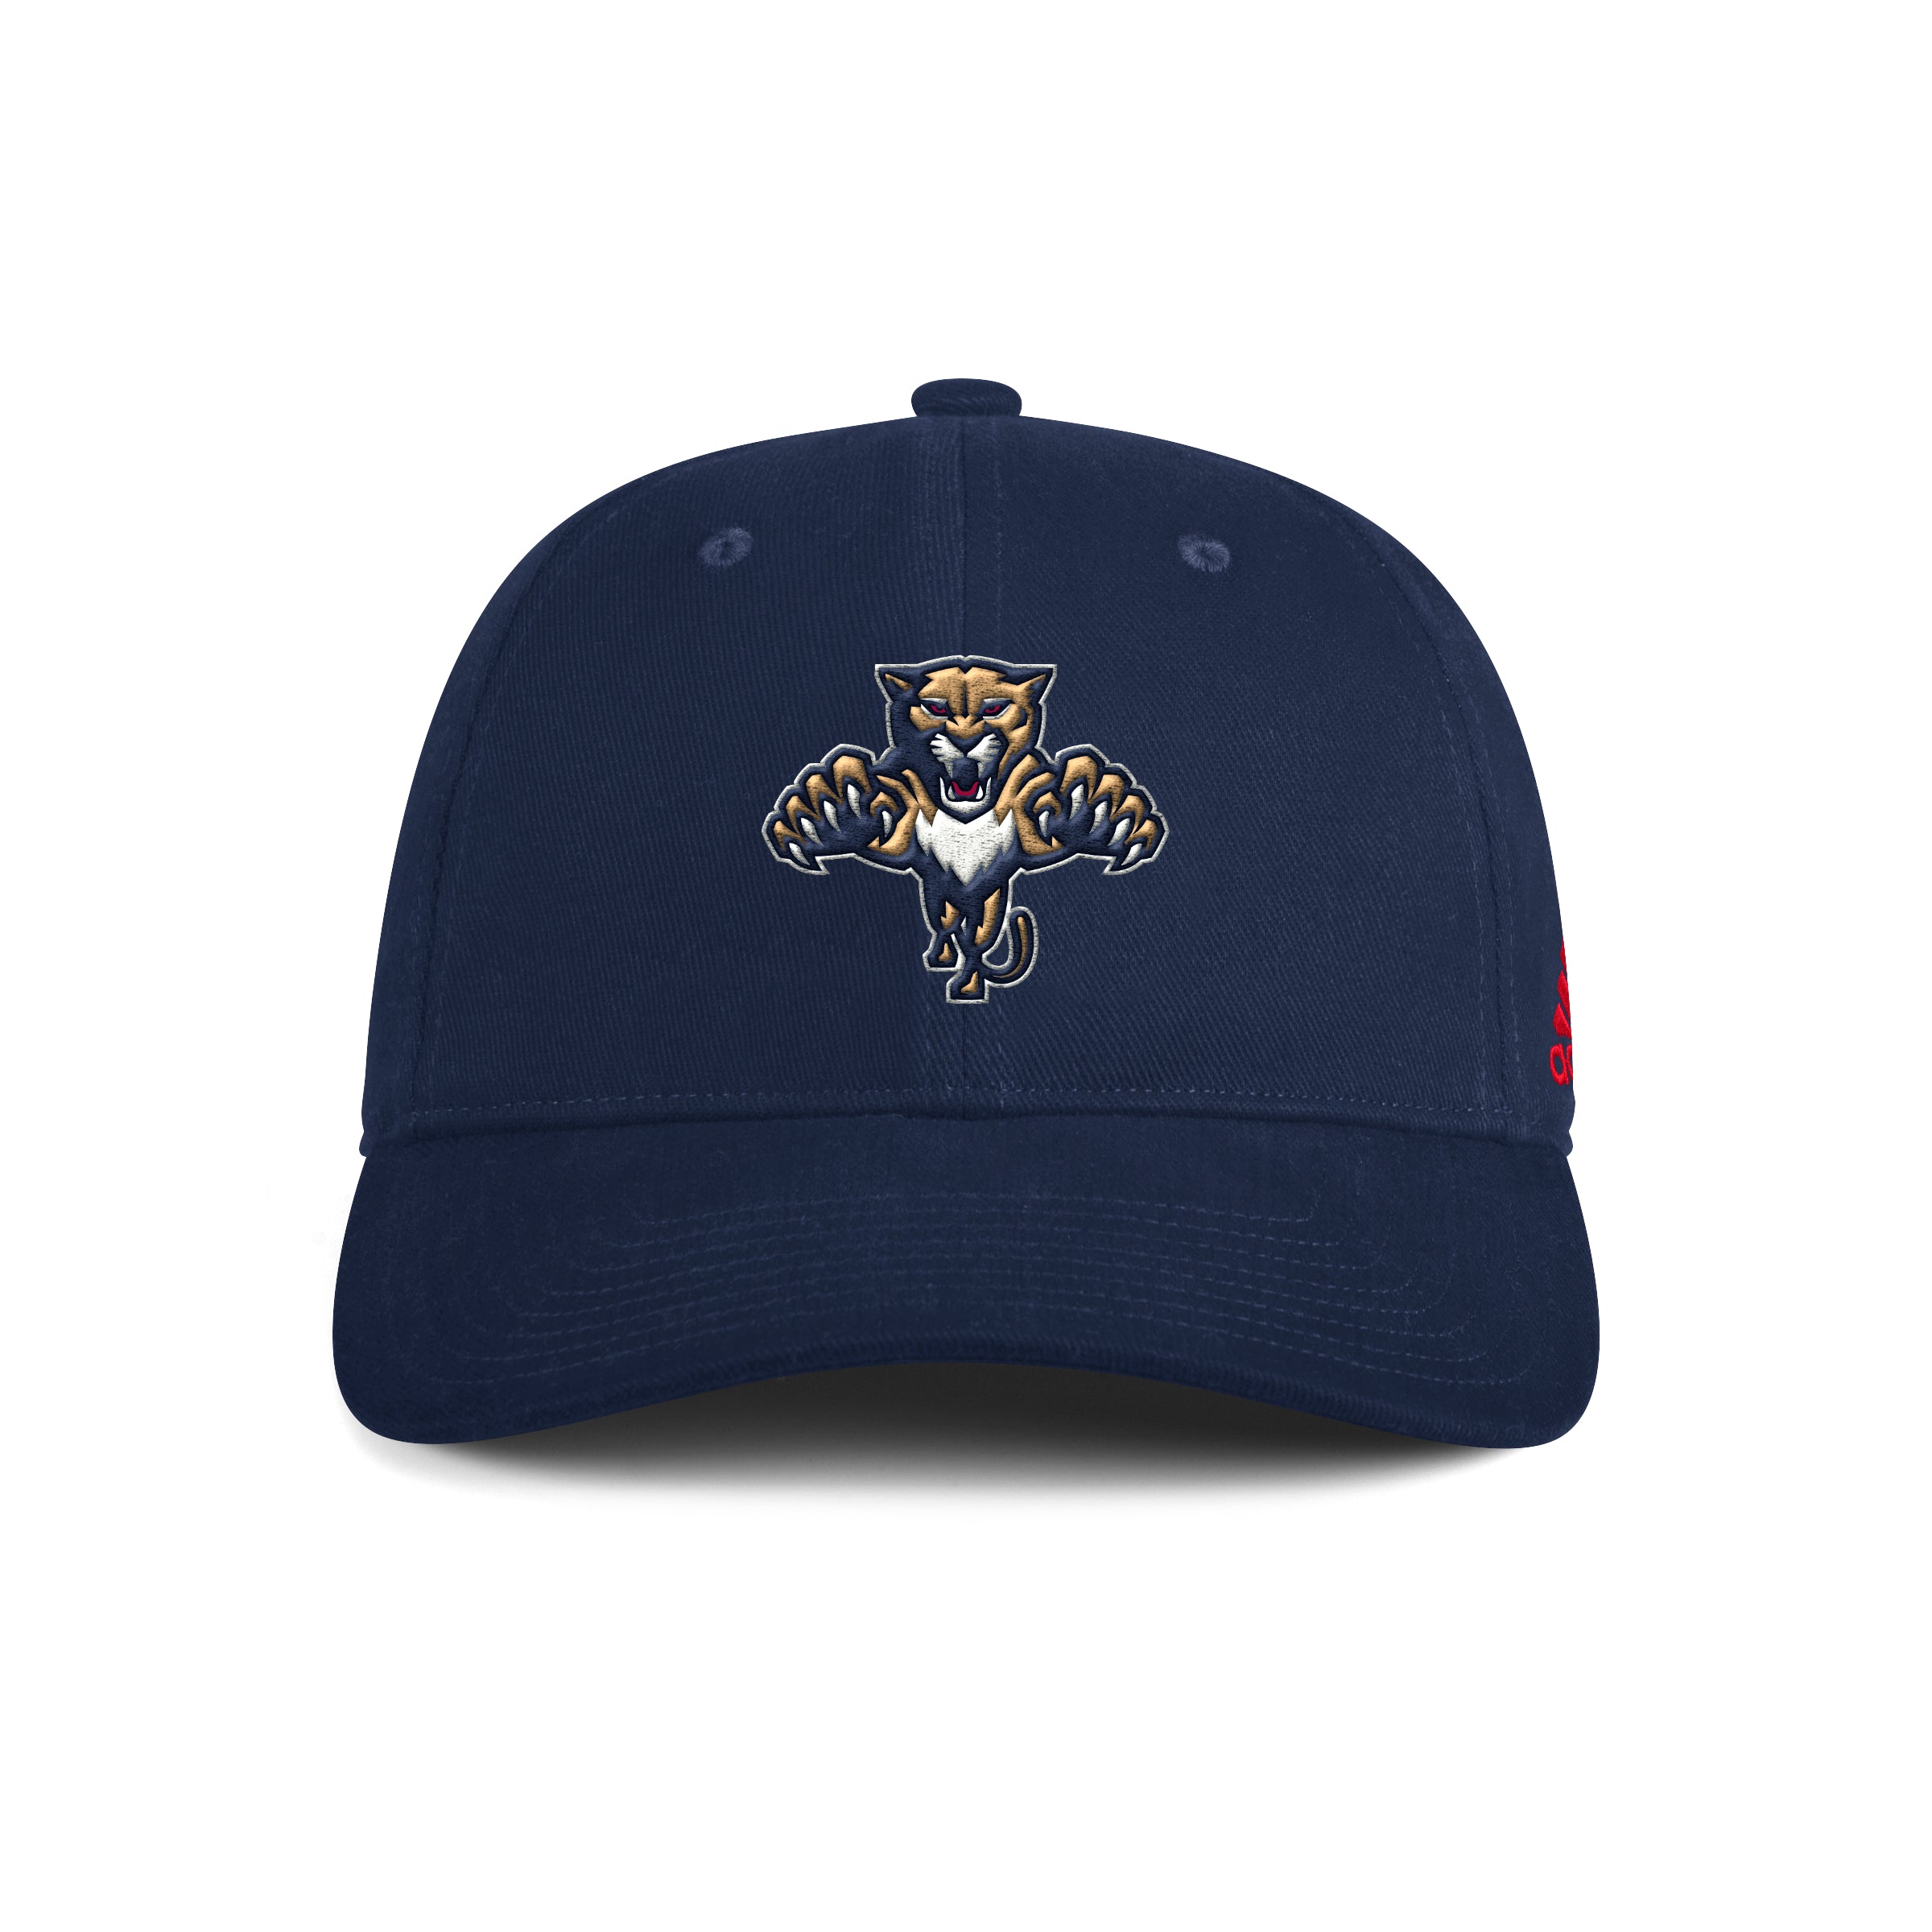 Florida Panthers adidas Pouncing Panther Stretch Fit Slouch hat - Navy